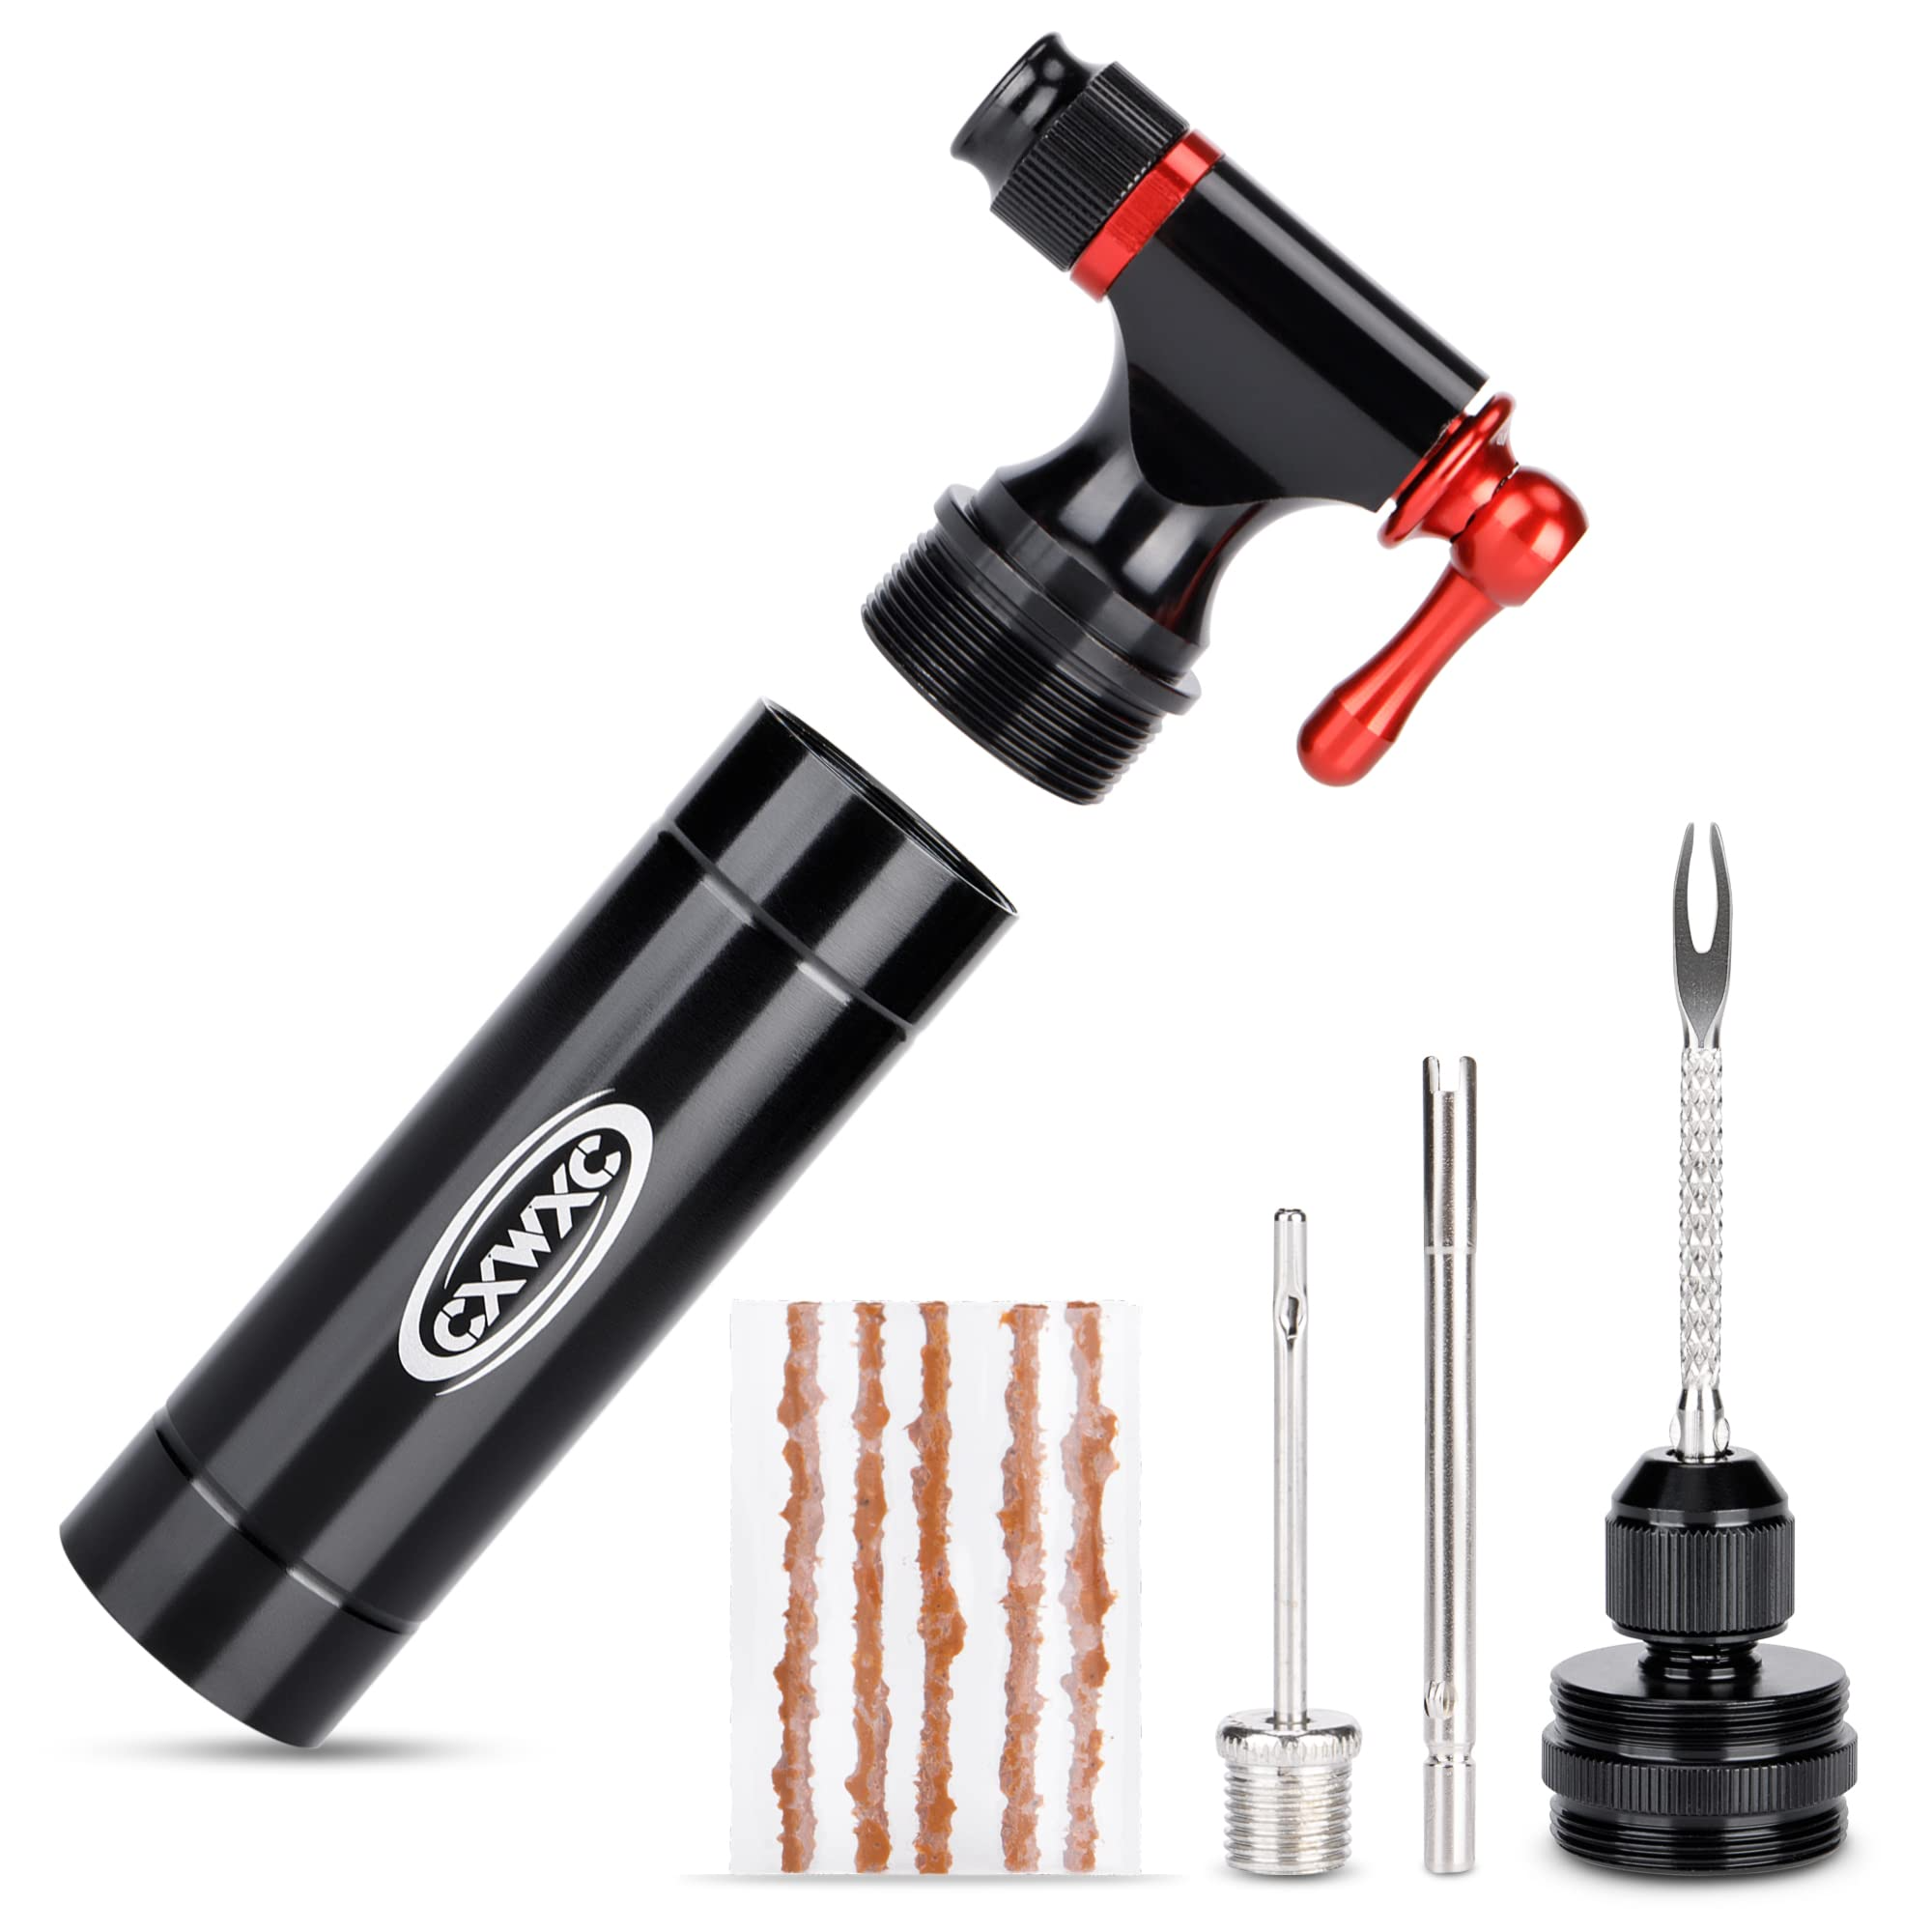 CO2 Inflator and Tubeless Tire Repair Kit - Presta & Schrader